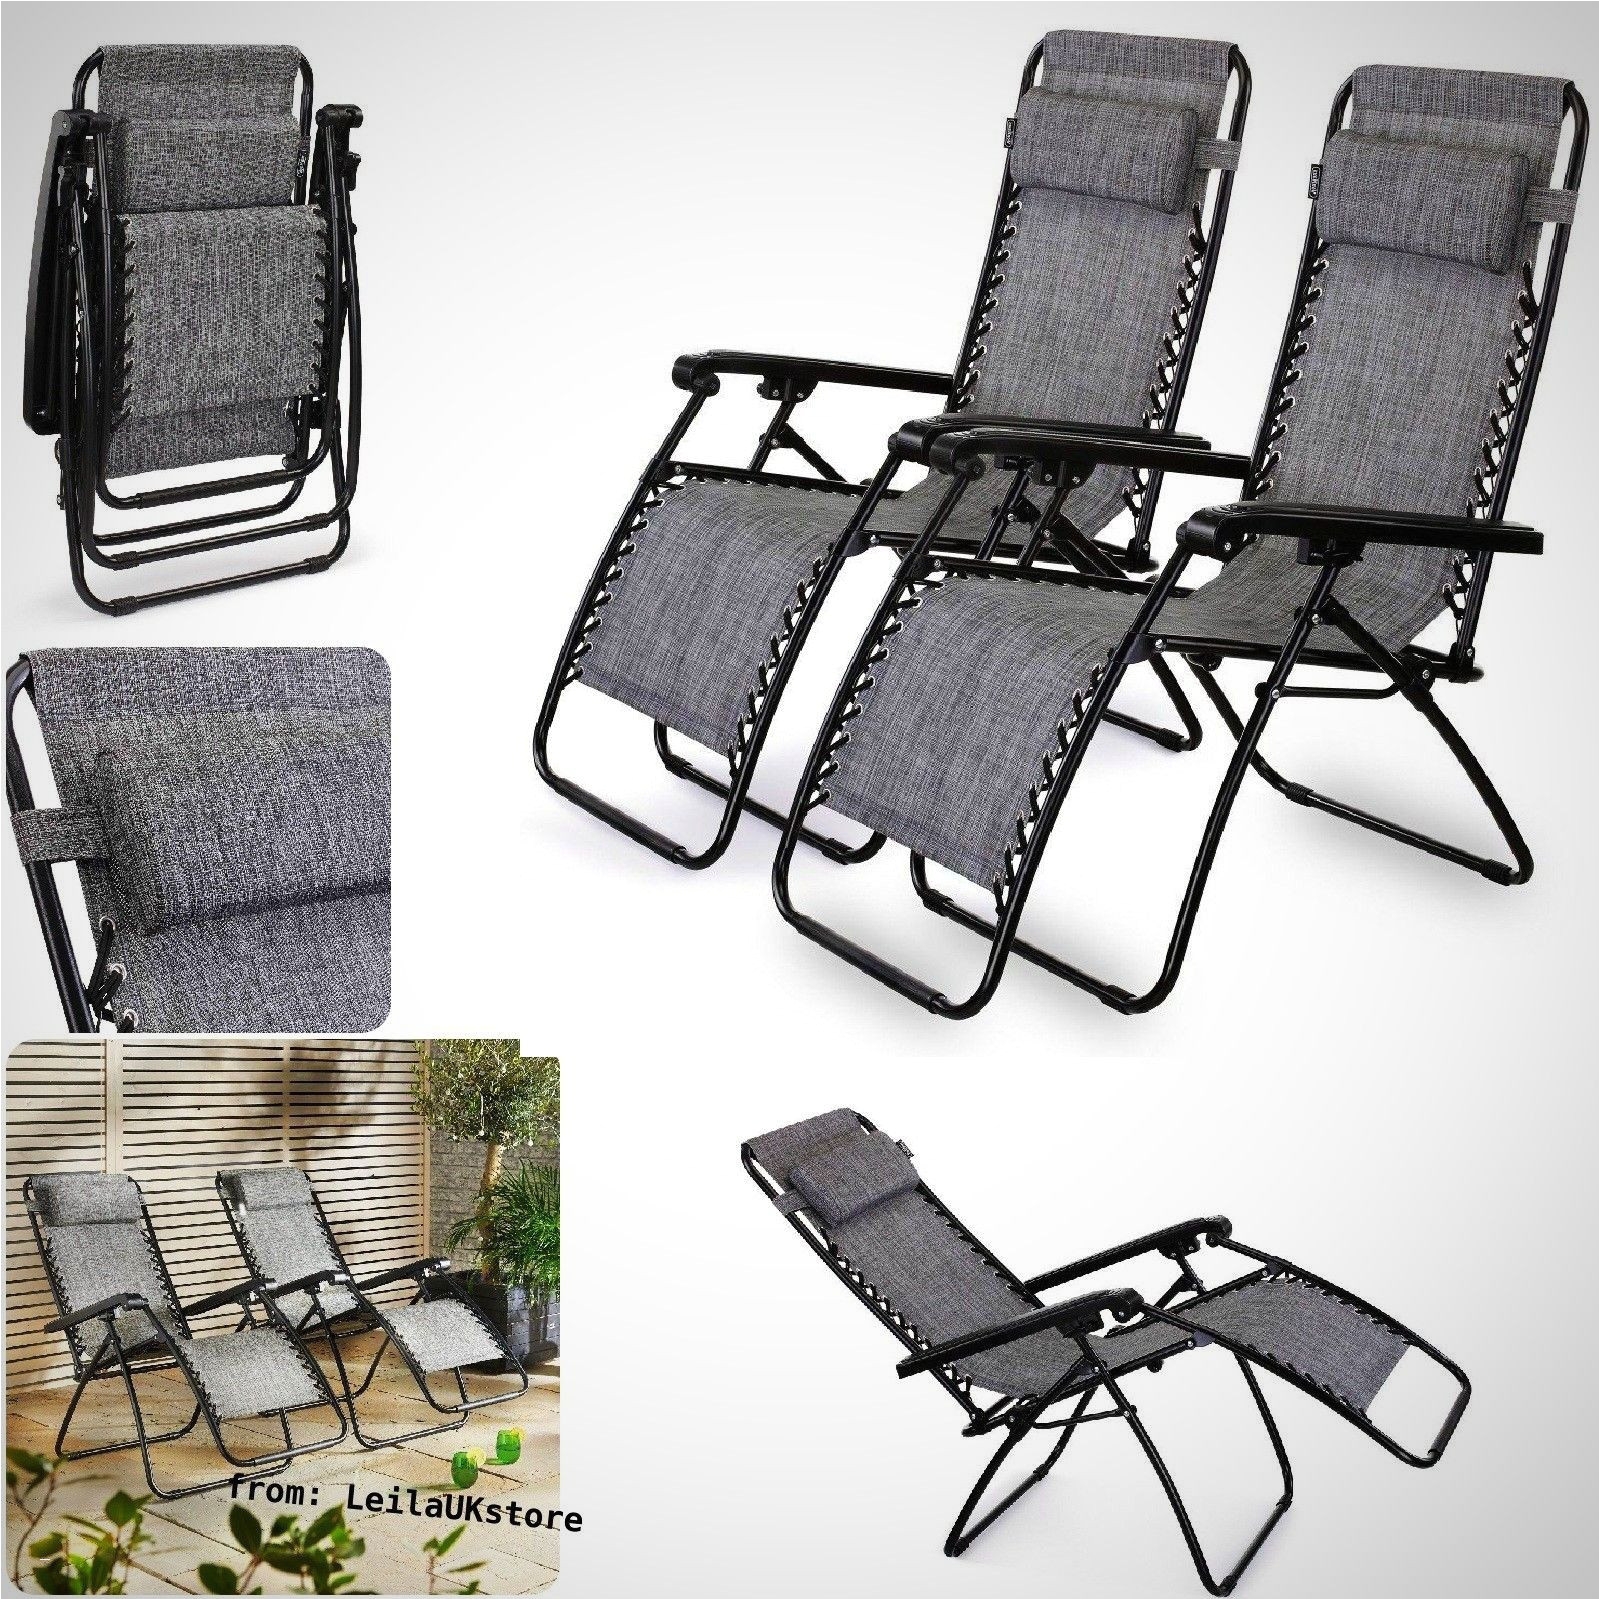 Best 0 Gravity Chair Zero Gravity Patio Chair Awesome Zero Gravity Outdoor Chair Lowes